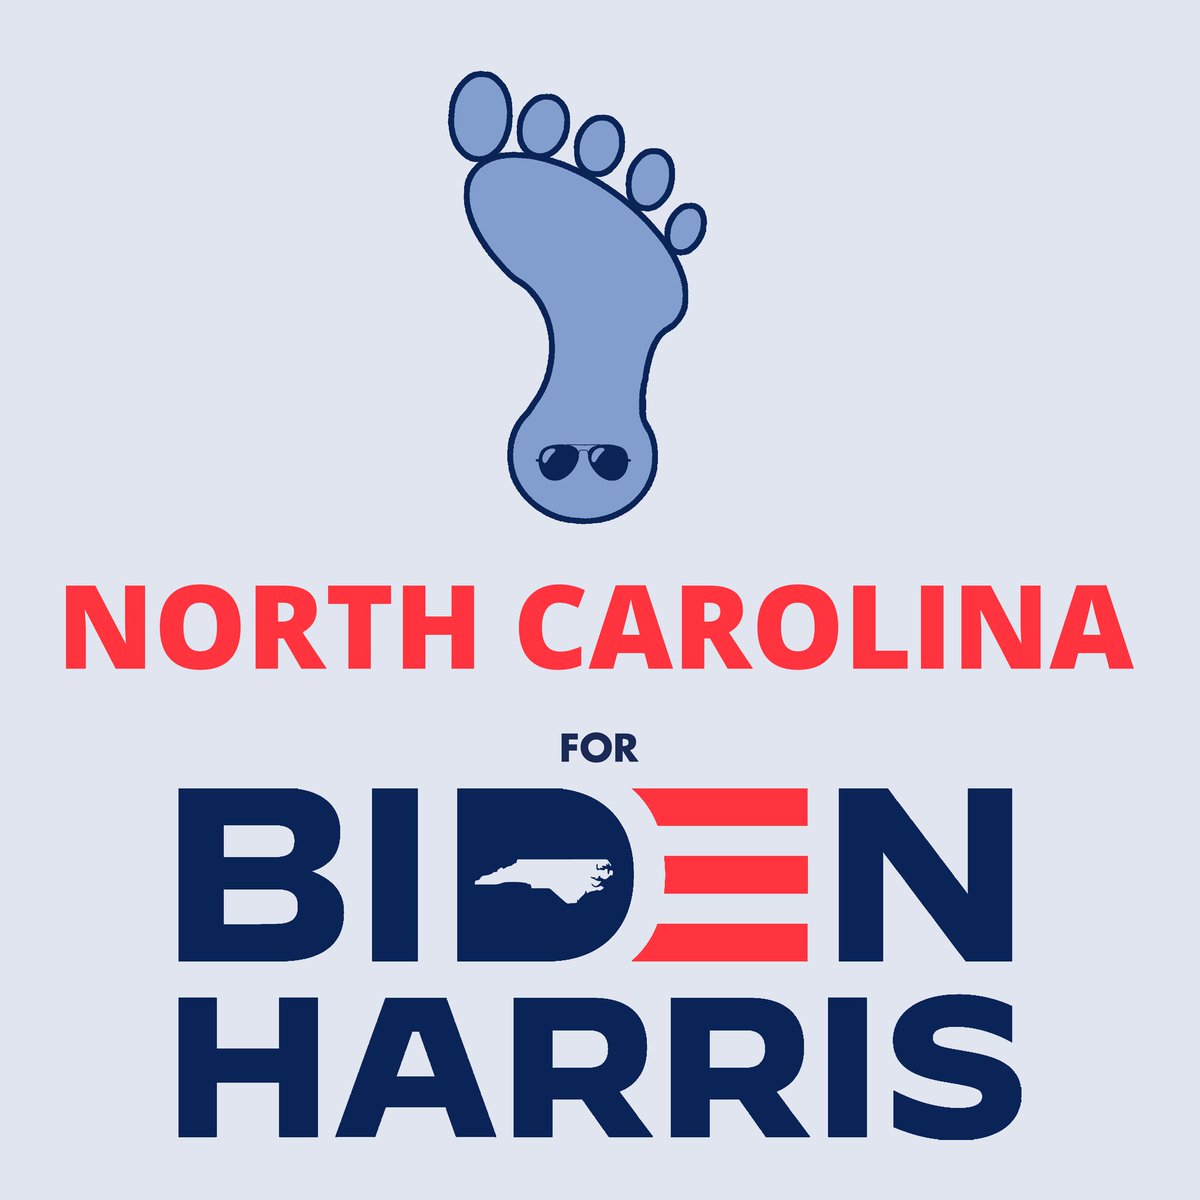 ICYMI my husband  @viva_verde is incredibly talented and made these beautiful state coalition graphics for  #BidenHarris supporters. More otw and he takes requests for priority! RT your state if you're  #RidinWithBidenHarris 5/8  #NewJersey  #NewMexico  #NewYork  #NorthCarolina